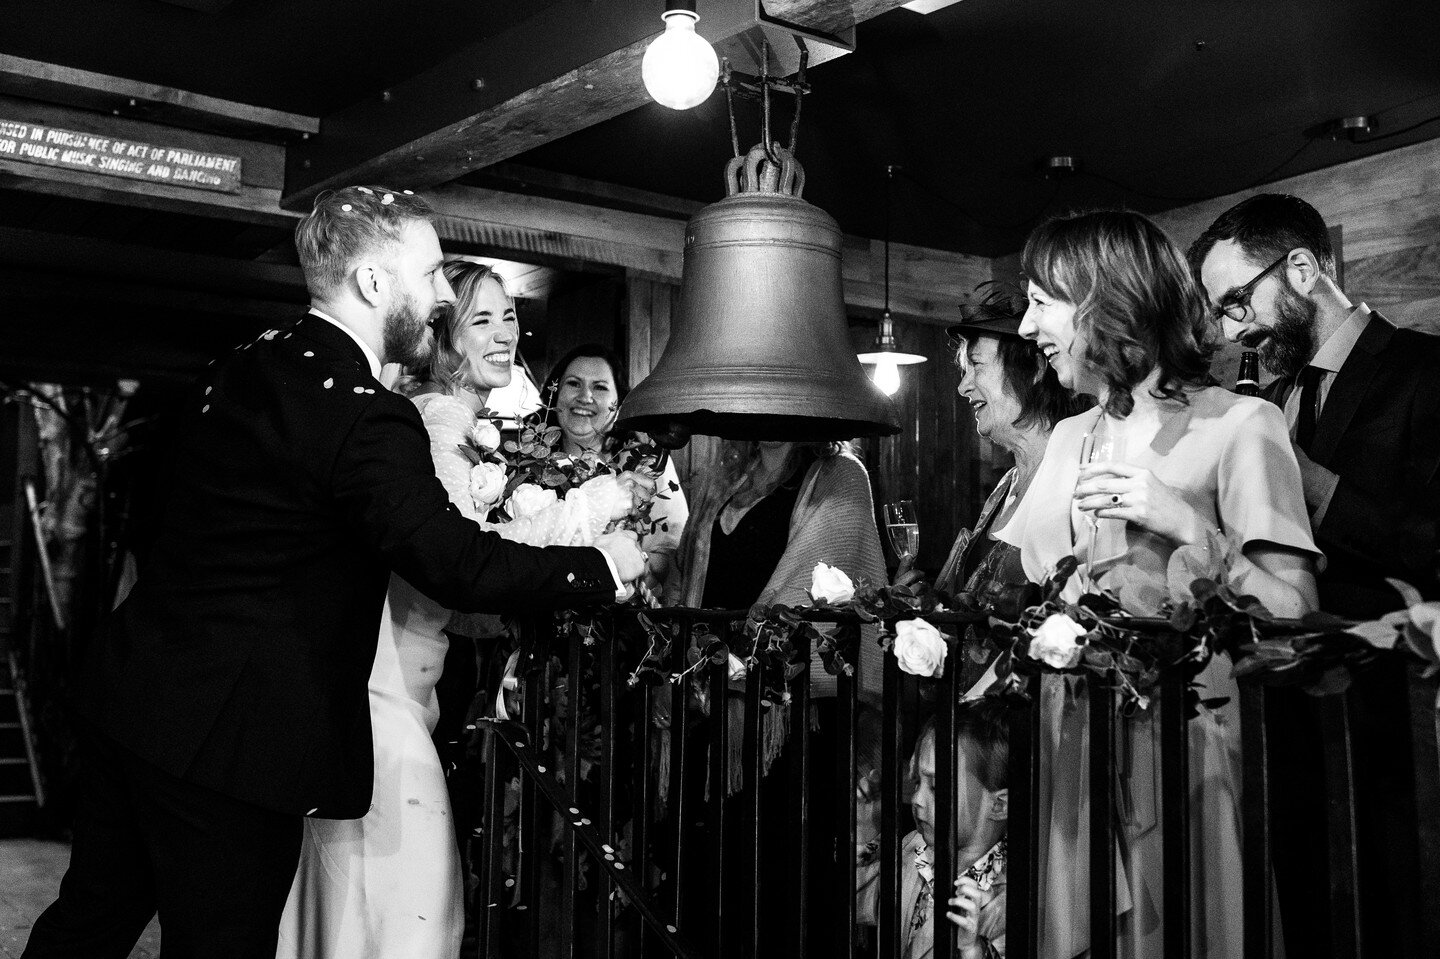 Ring the bell if you're now married and had the best day ever! 

Bride: @sofyhugh
Venue: @thebellinticehurst
Dress: @threadsbridalnorfolk
Hair &amp; Make up: @d_halloffame
Flowers: @lavenderblucornwall
DJ: @stickiton
Brass Band: @oompahbrass

#thebel